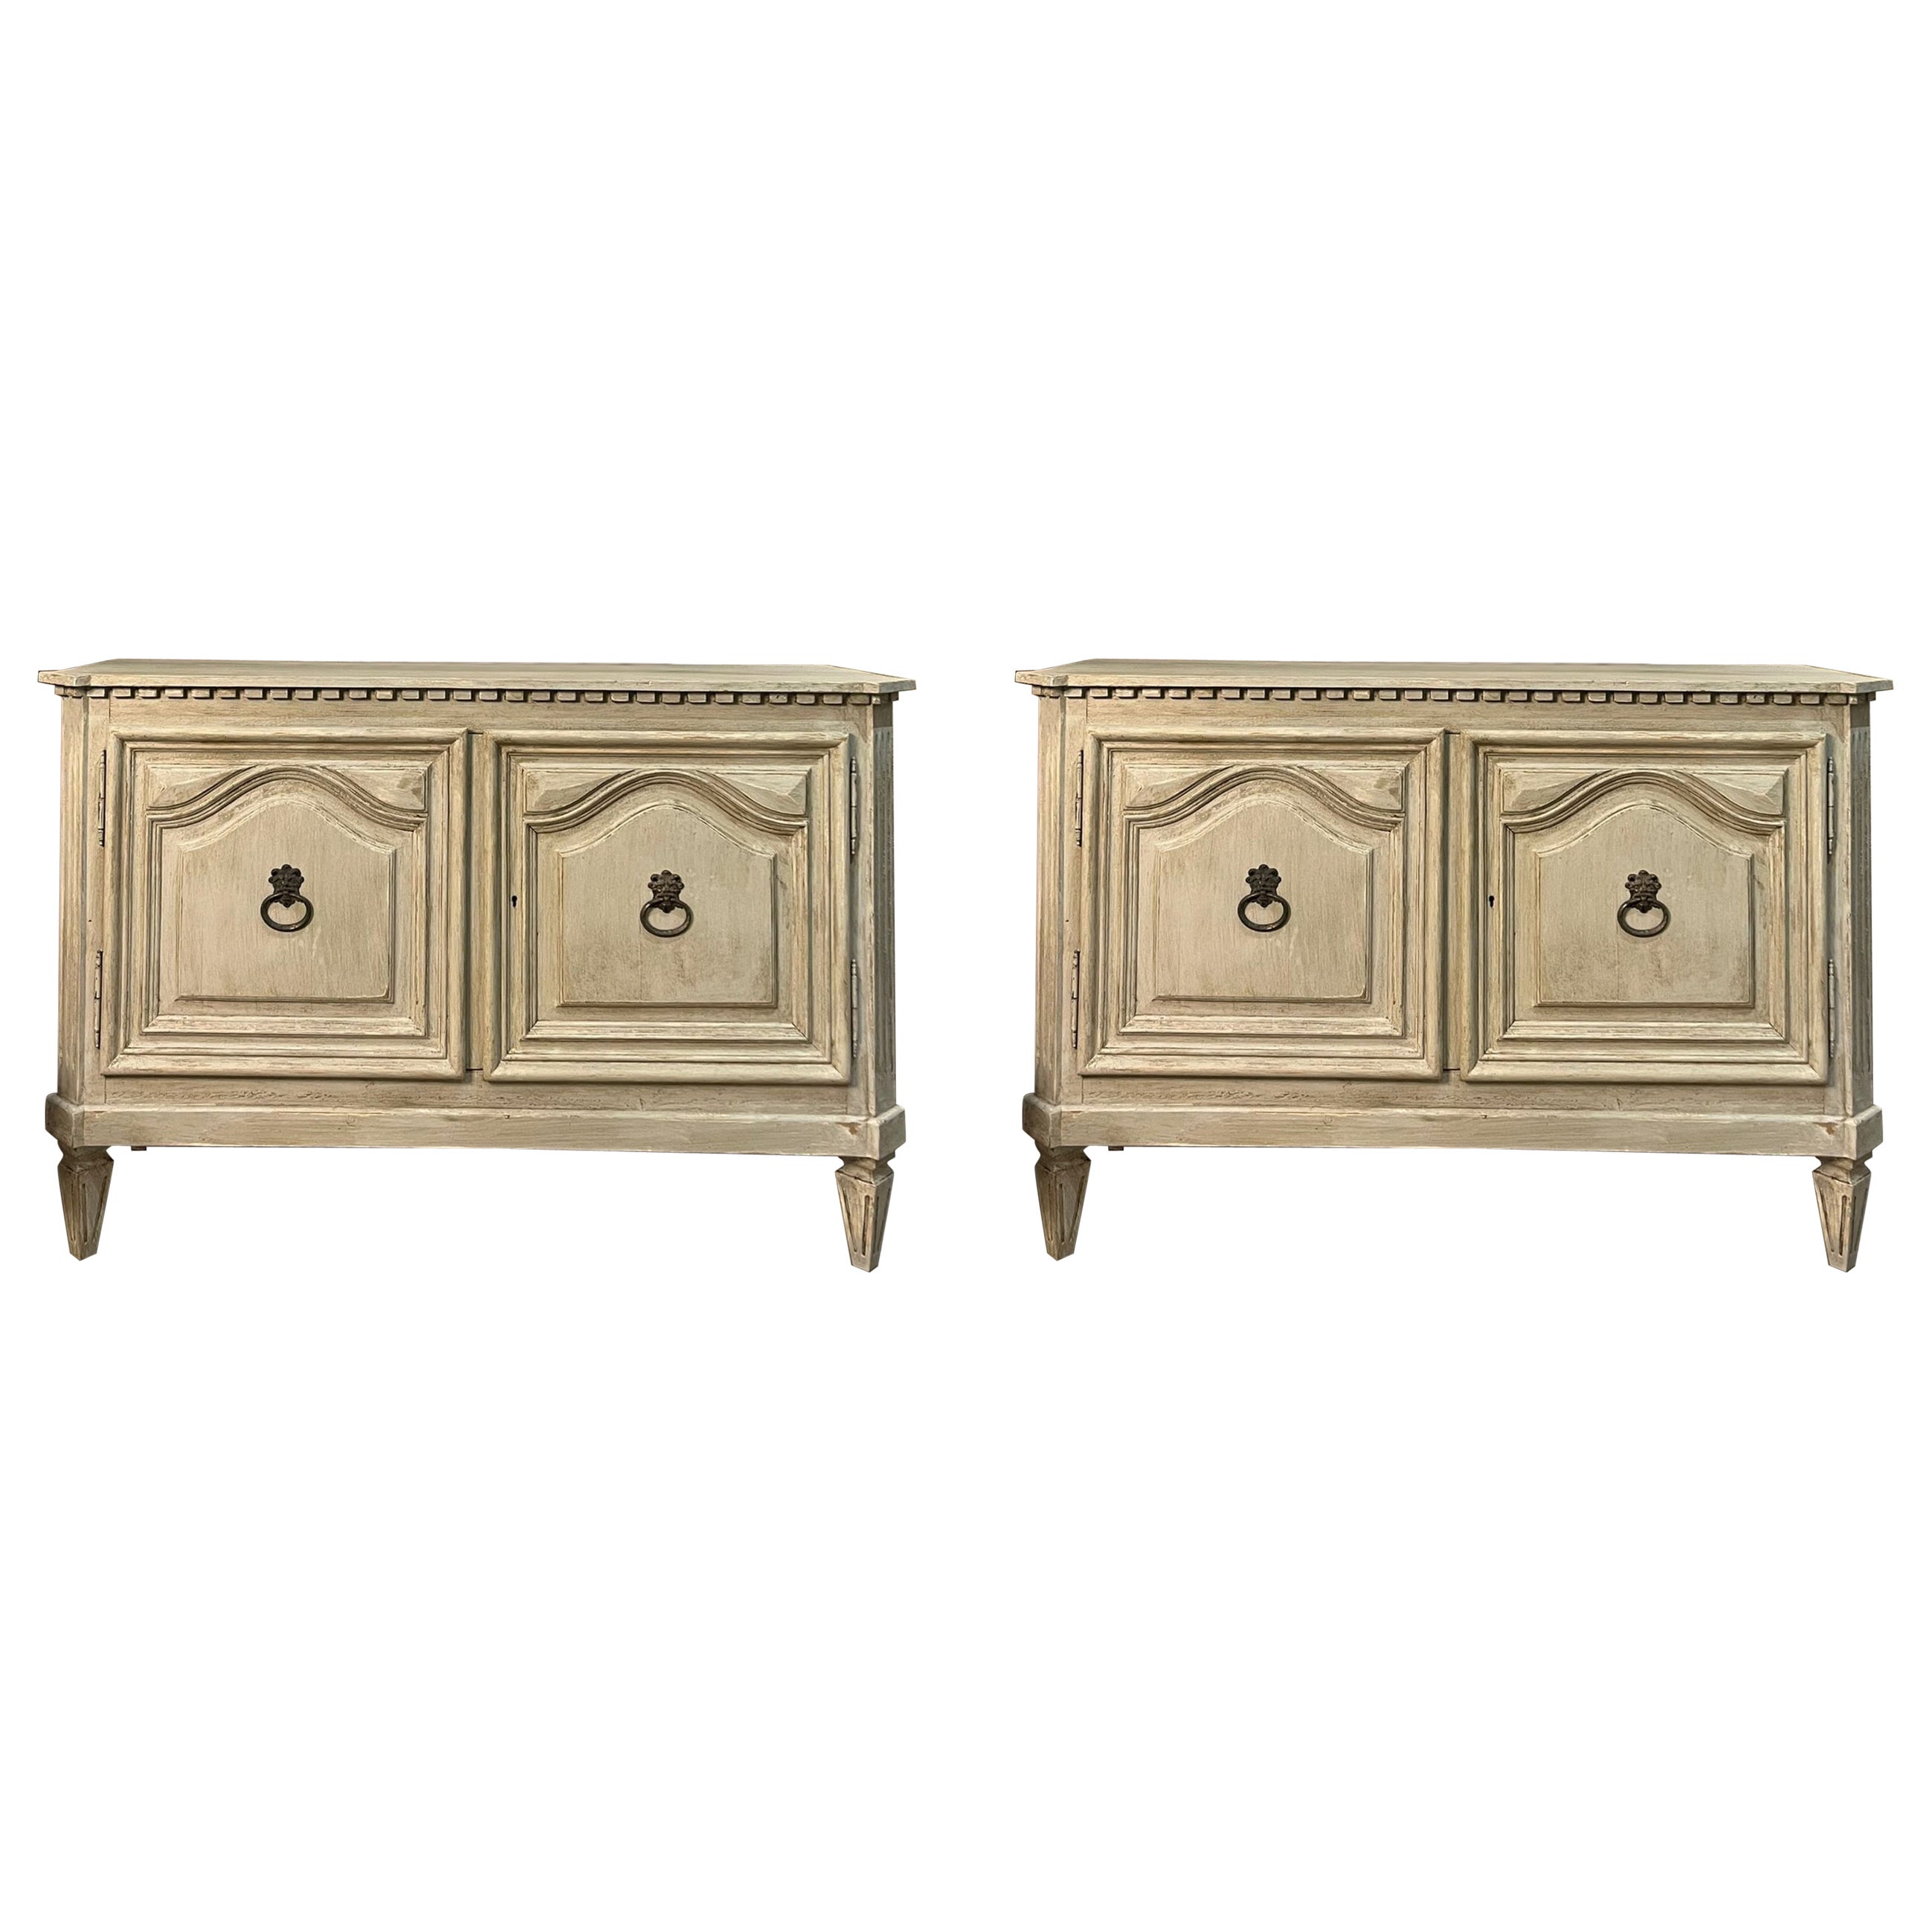 Beautiful Pair of Italian Chests of Drawers early 20th Century with Wood Panels For Sale